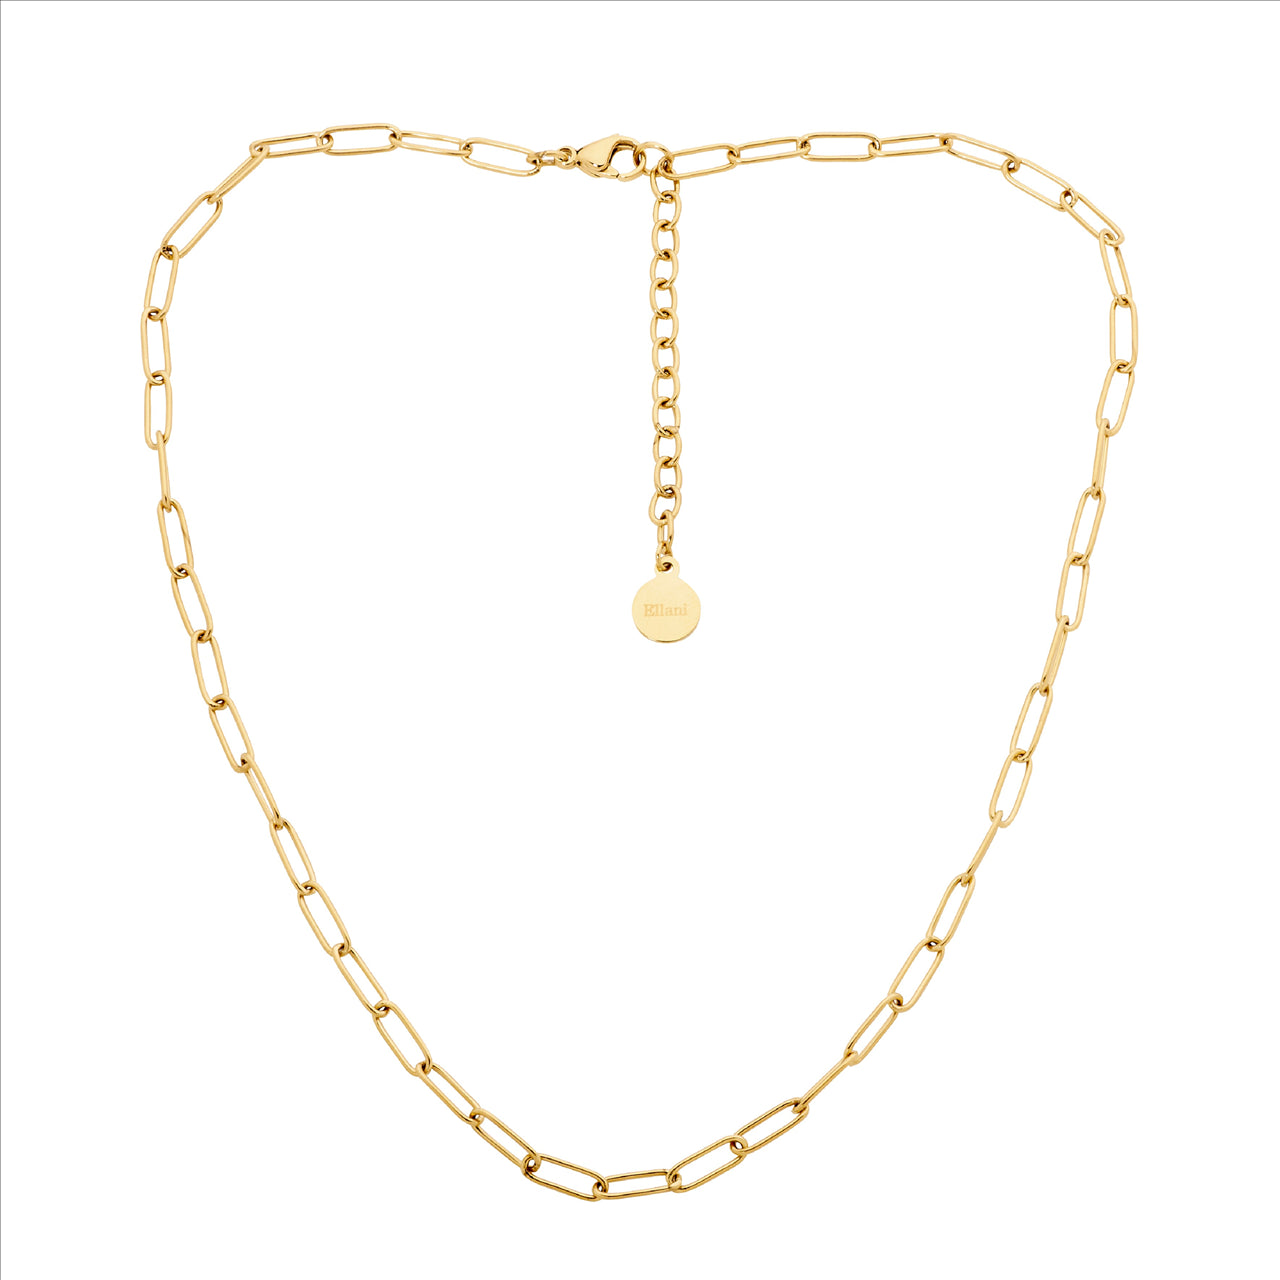 Gold Plated Stainless Steel Paperclip Necklace Chain With Extension